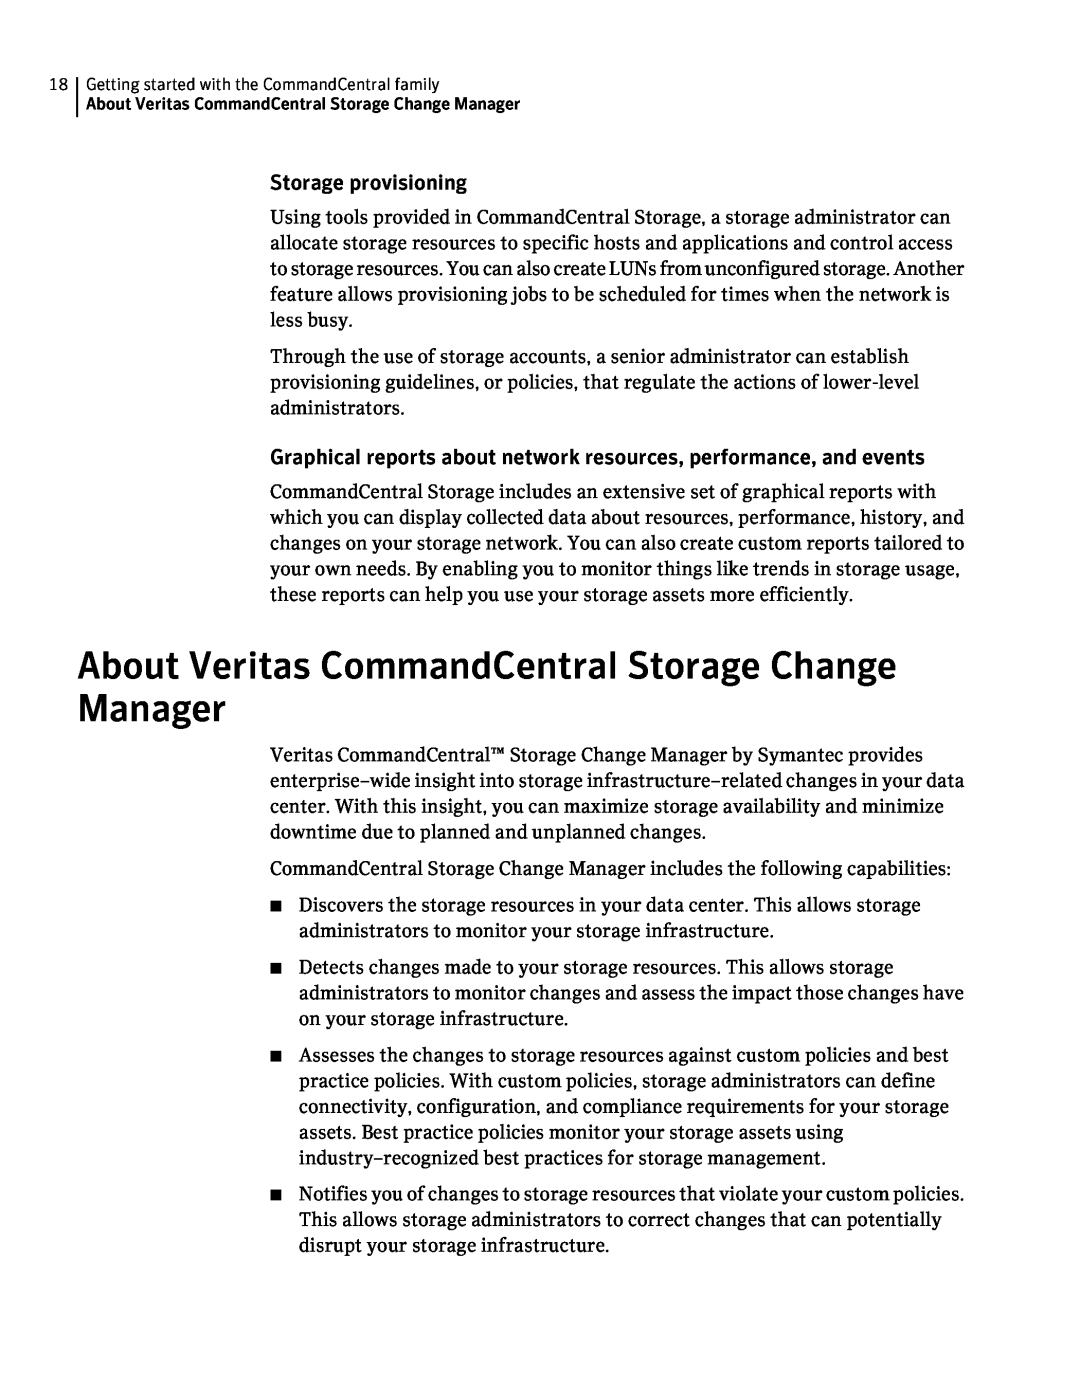 Symantec 5.1 manual About Veritas CommandCentral Storage Change Manager, Storage provisioning 